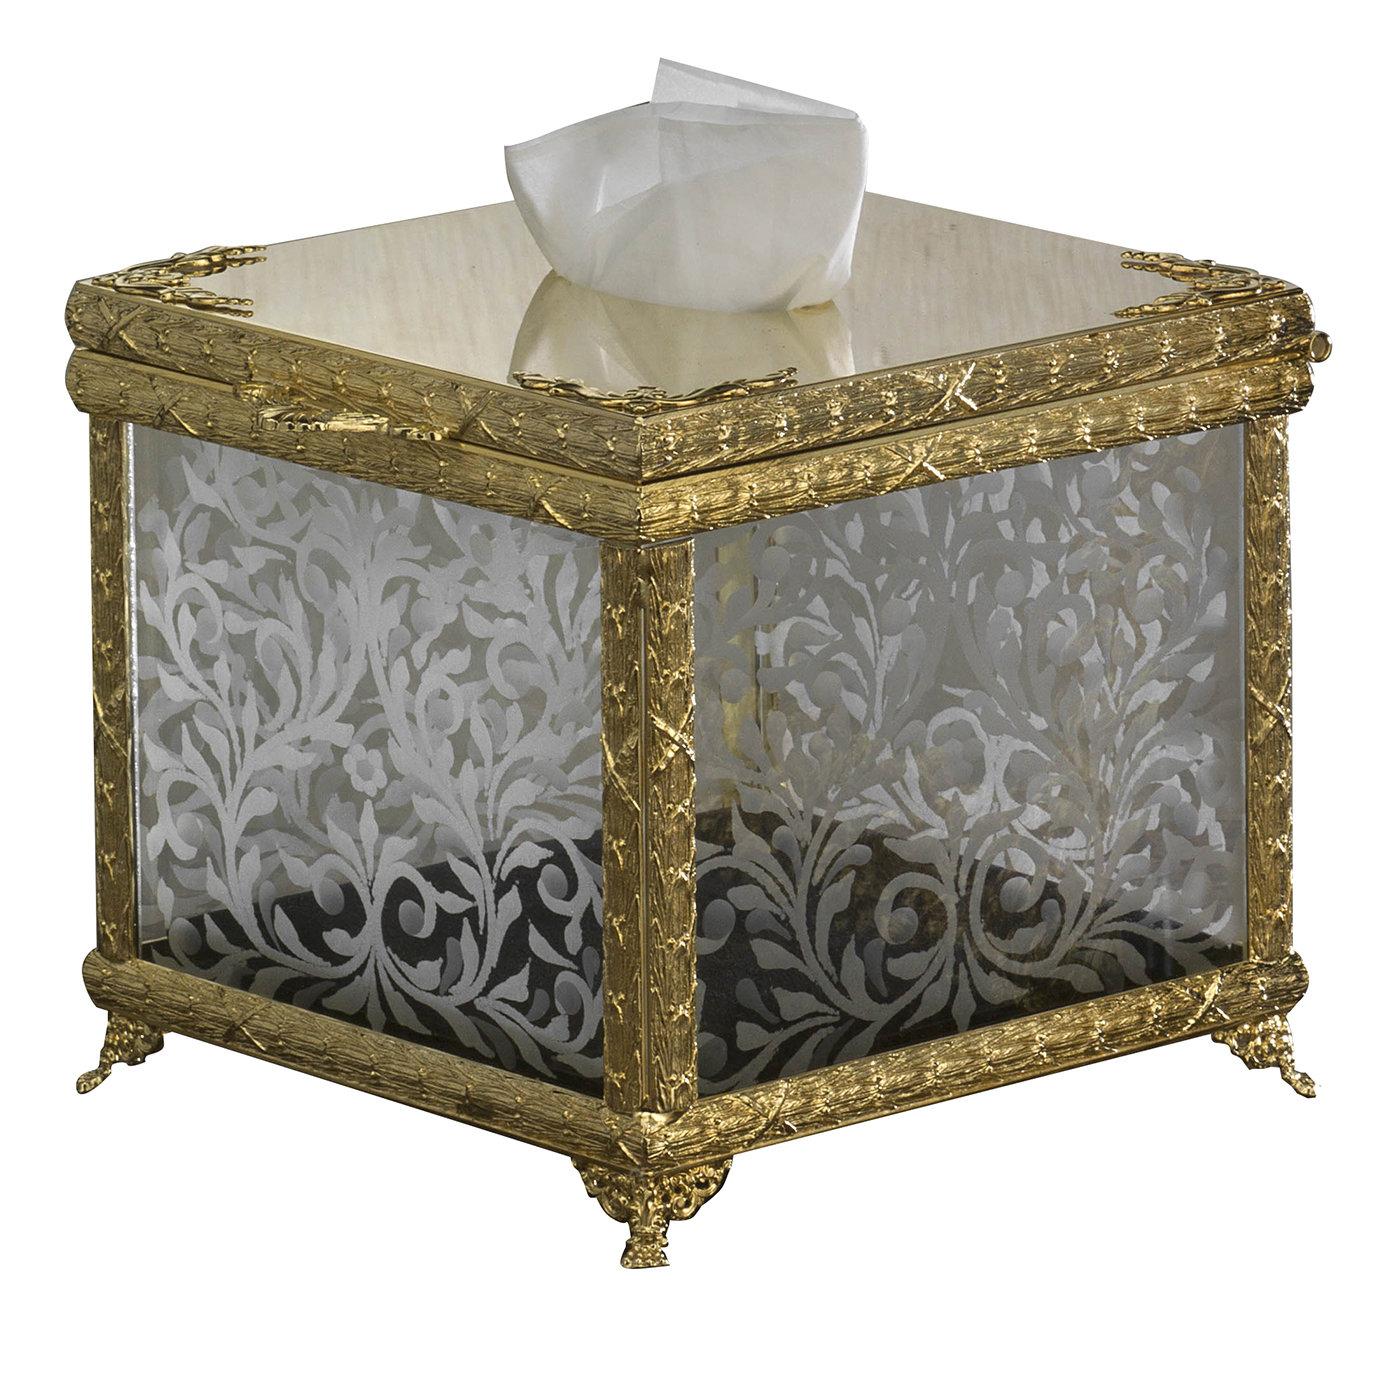 Gold and Glass Square Tissue Box Holder